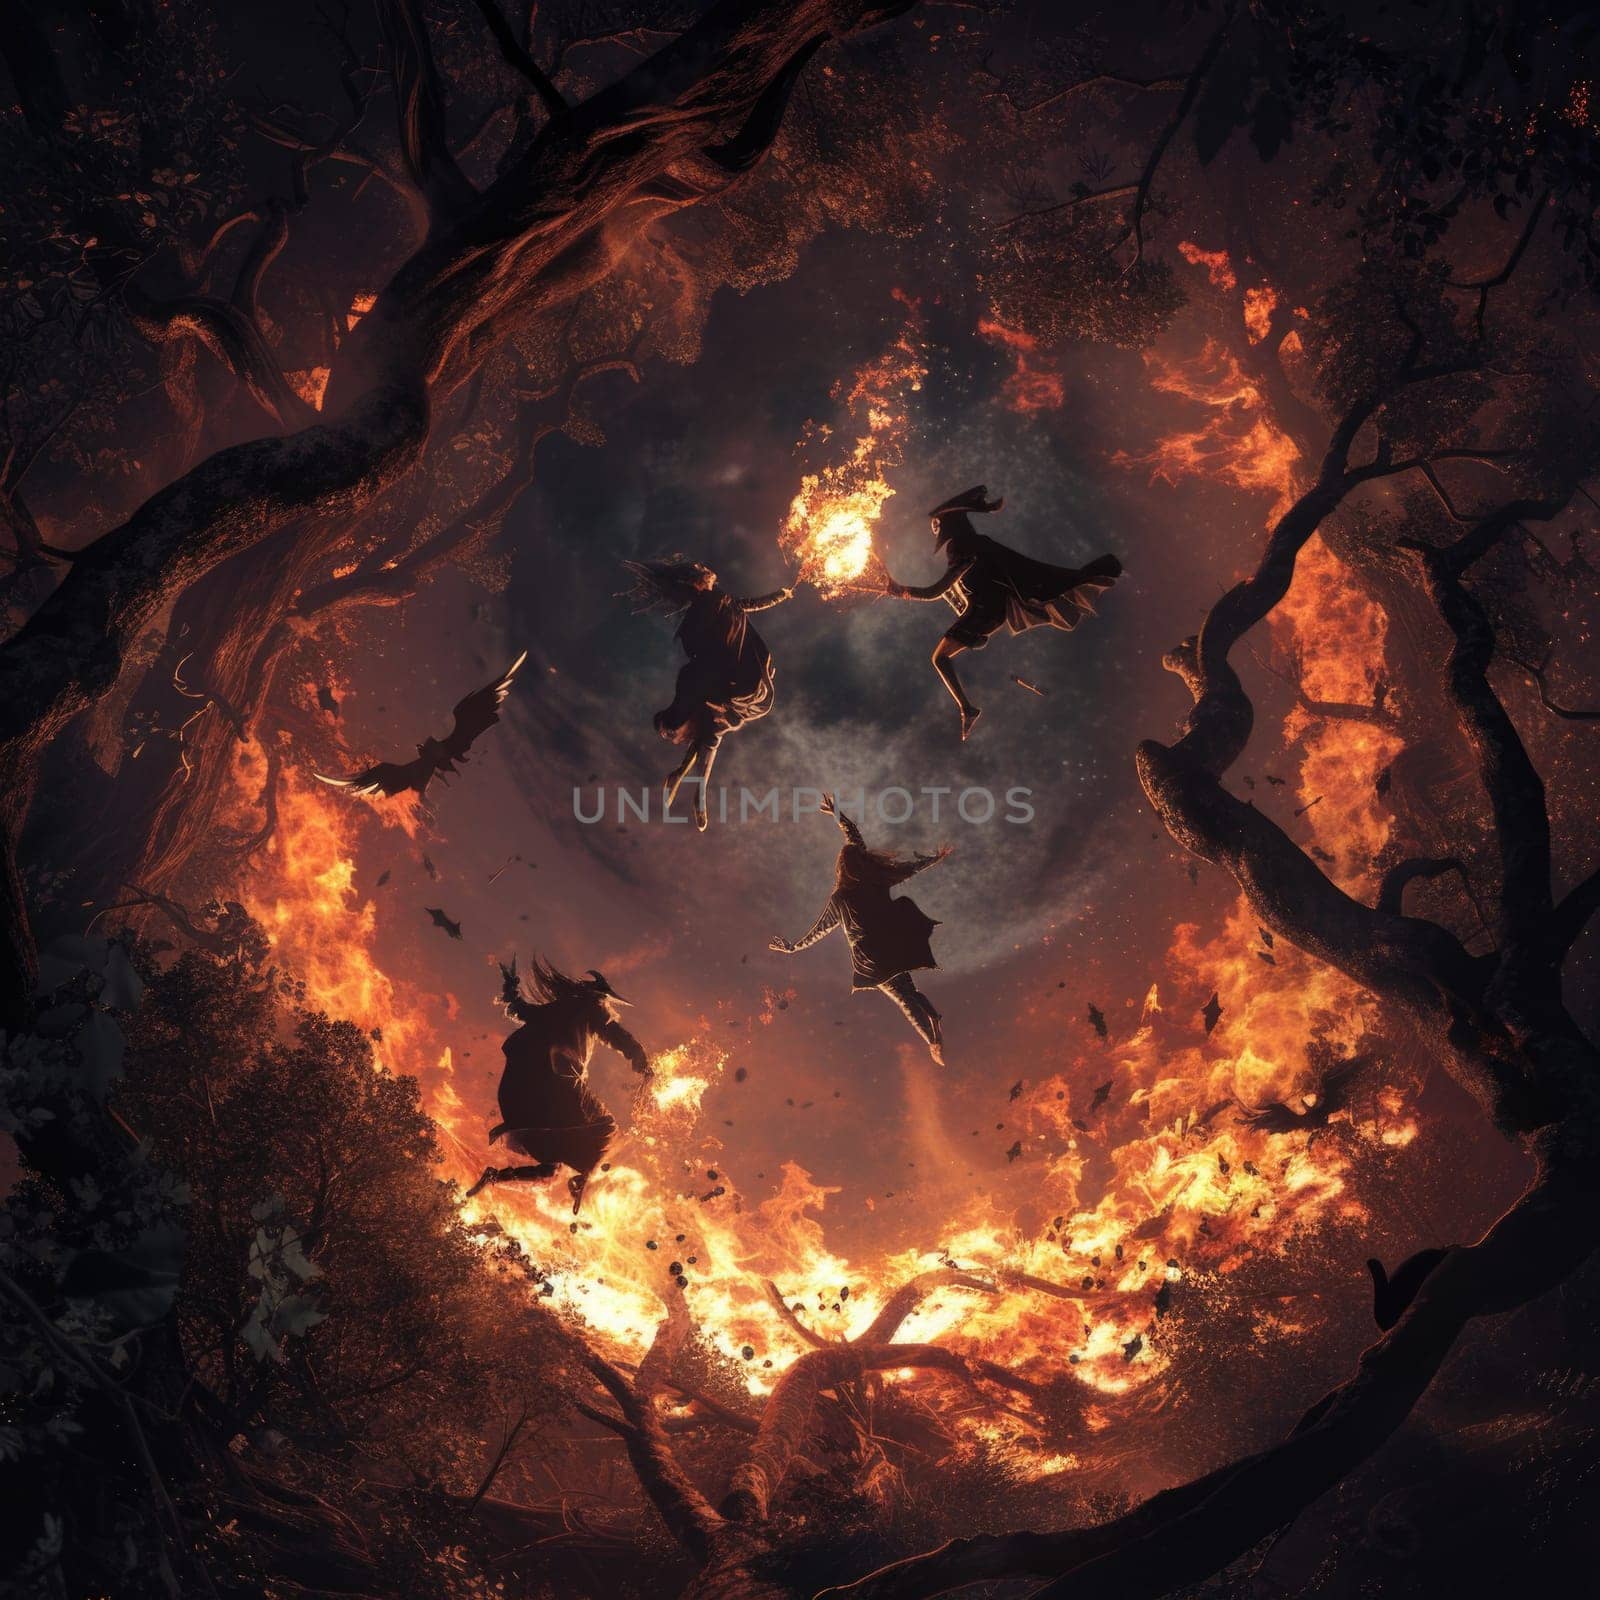 A group of individuals on horseback navigate through a forest engulfed in flames.